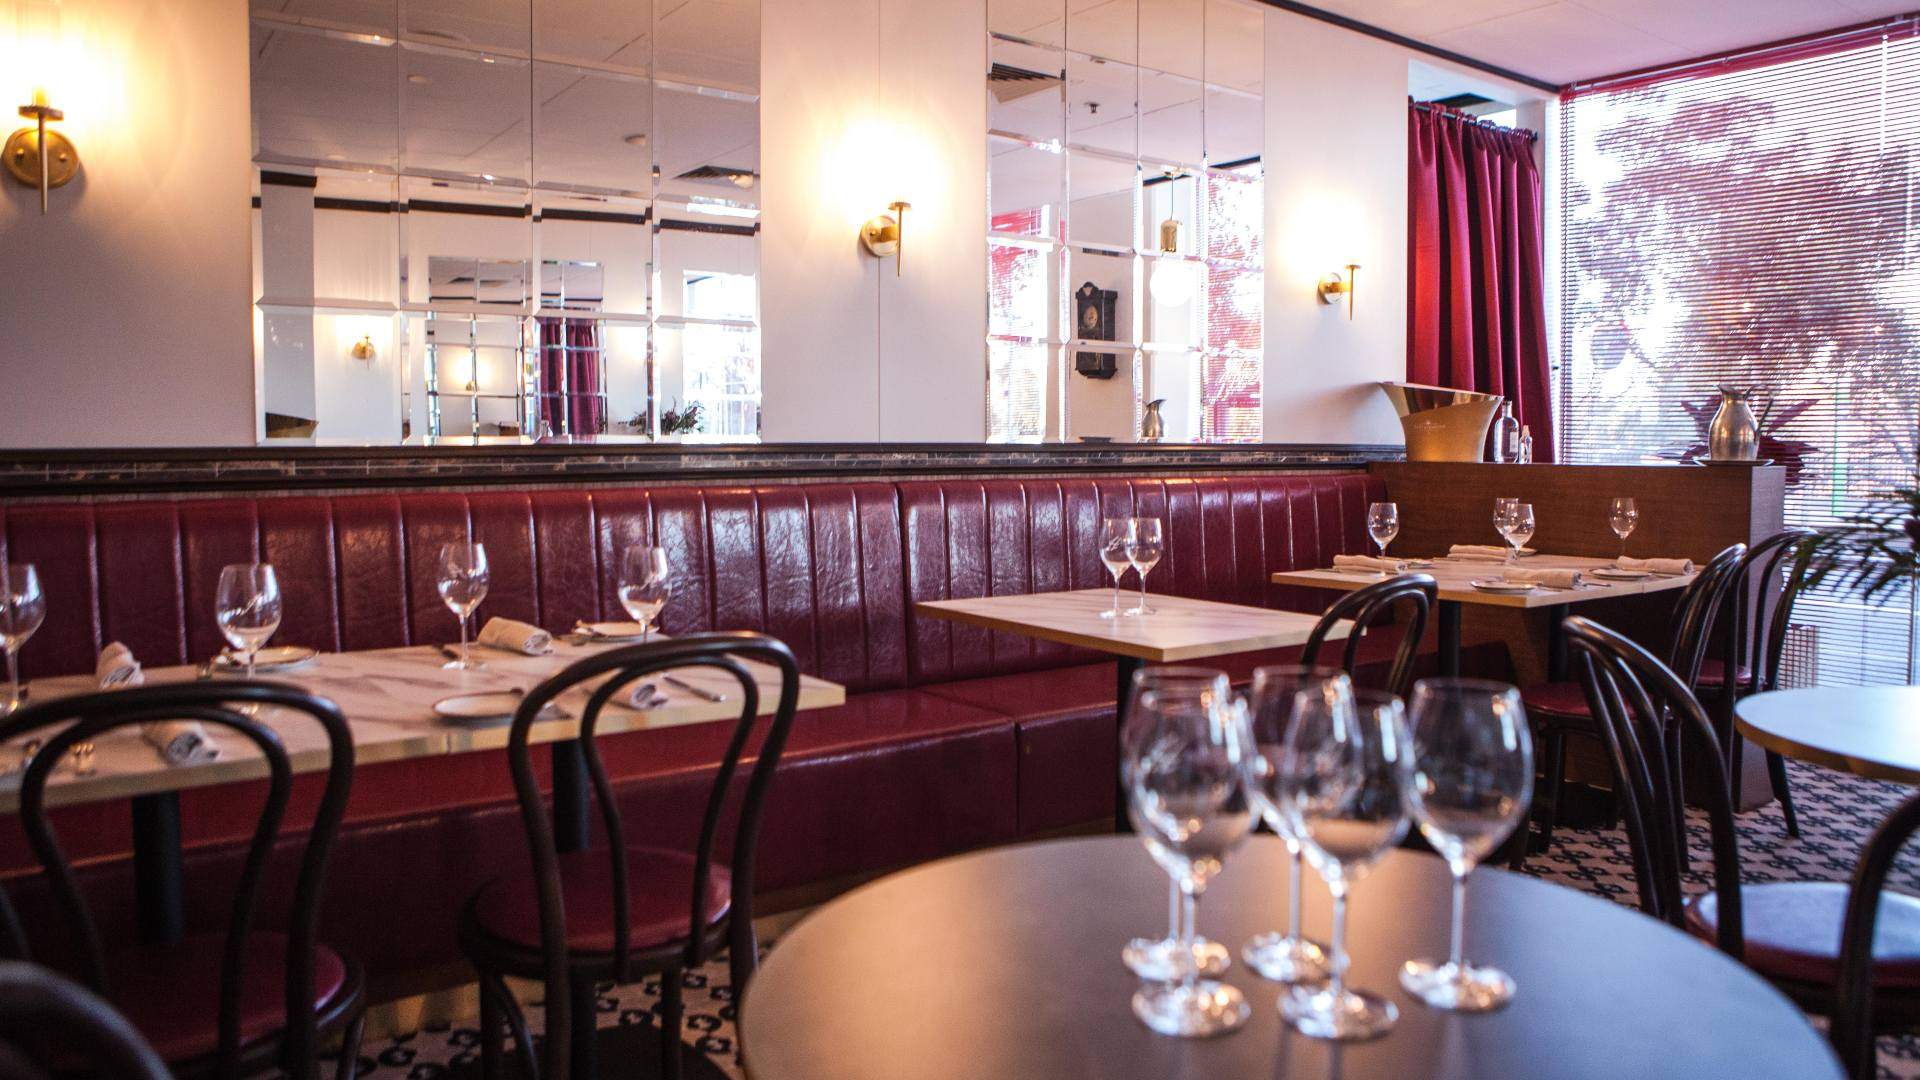 Hemingway's Wine Room Is East Melbourne's New Art Deco-Inspired Bar and Brasserie